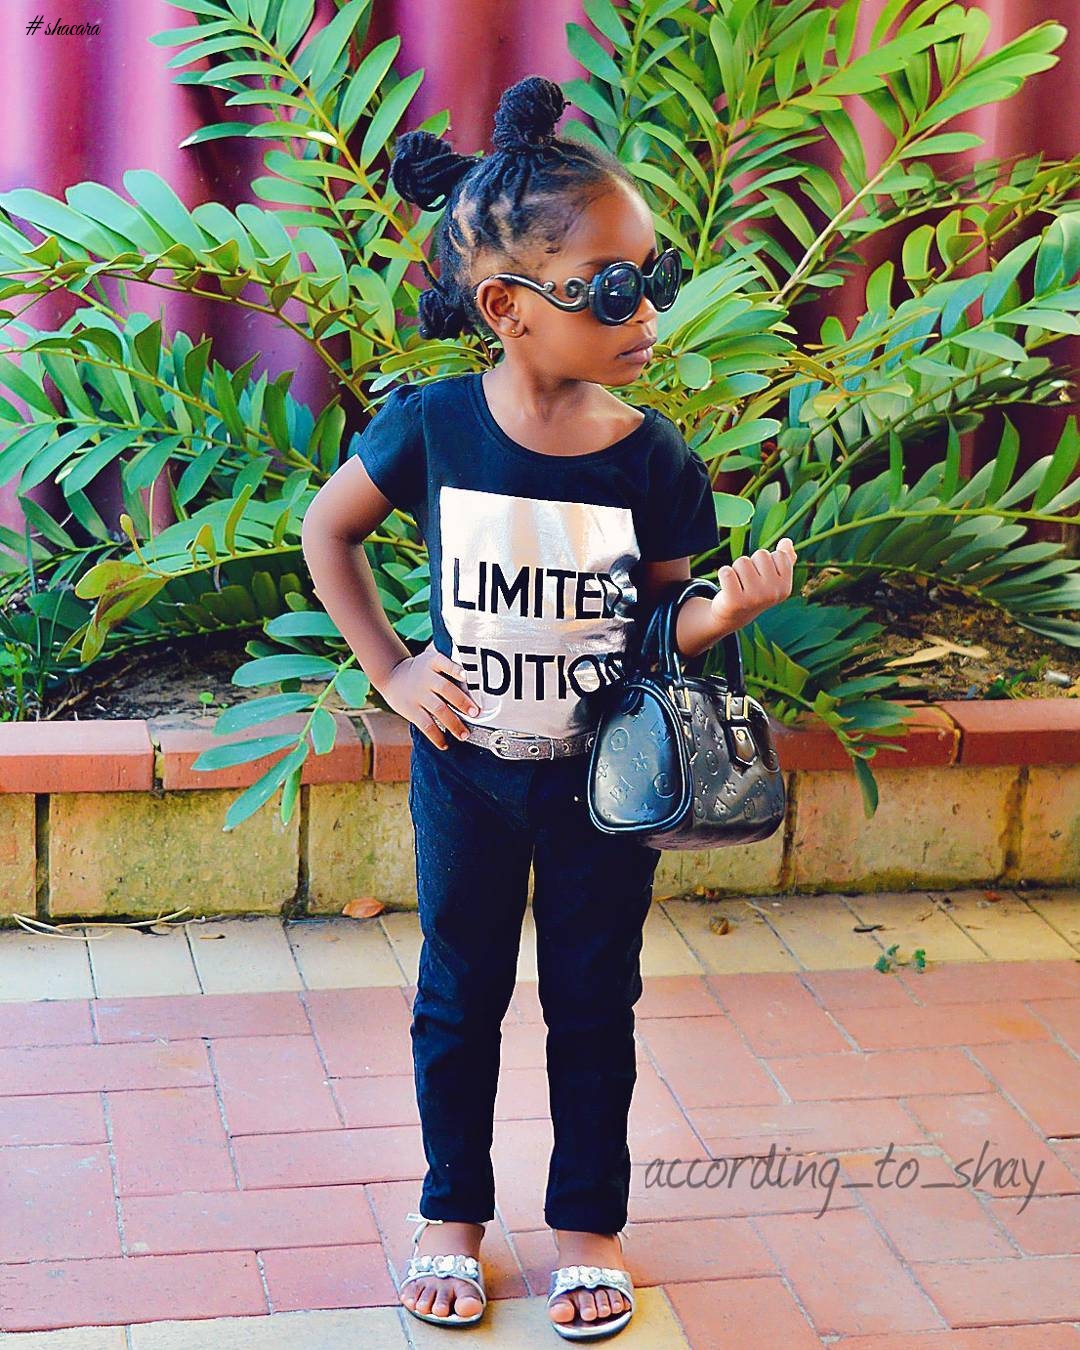 CHECK OUT WHAT THE FASHION FORWARD KIDS ARE PULLING OFF NOW!